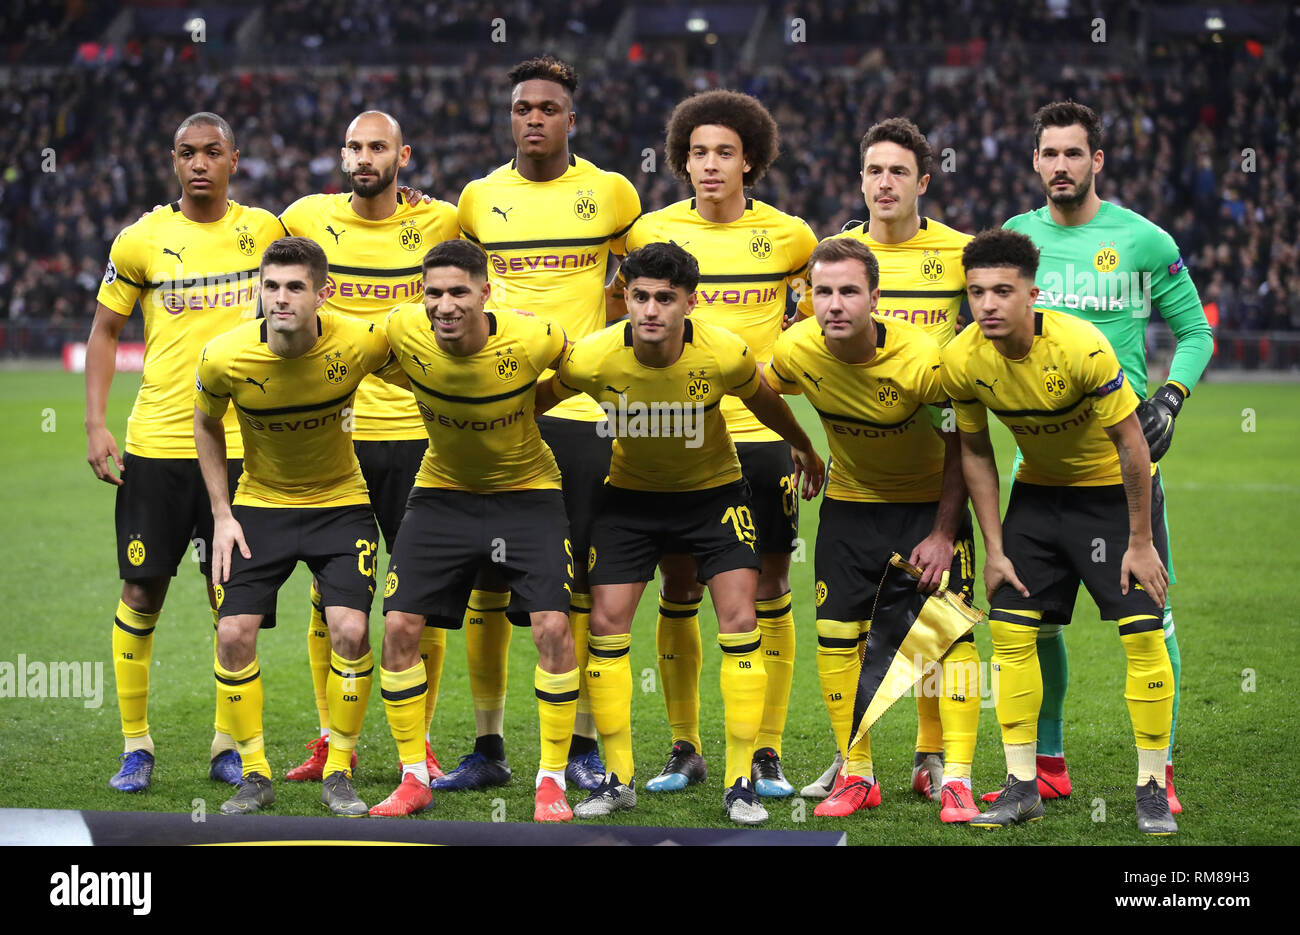 Borussia Dortmund's (top row, from left to right) Abdou Diallo, Omer Toprak, Dan-Axel Zagadou, Axel Witsel, Thomas Delaney and Roman Burki (bottom row, from left to right) Christian Pulisic, Achraf Hakimi, Mahmoud Dahoud, Mario Gotze and Jadon Sancho during the UEFA Champions League round of 16, first leg match at Wembley Stadium, London. Stock Photo